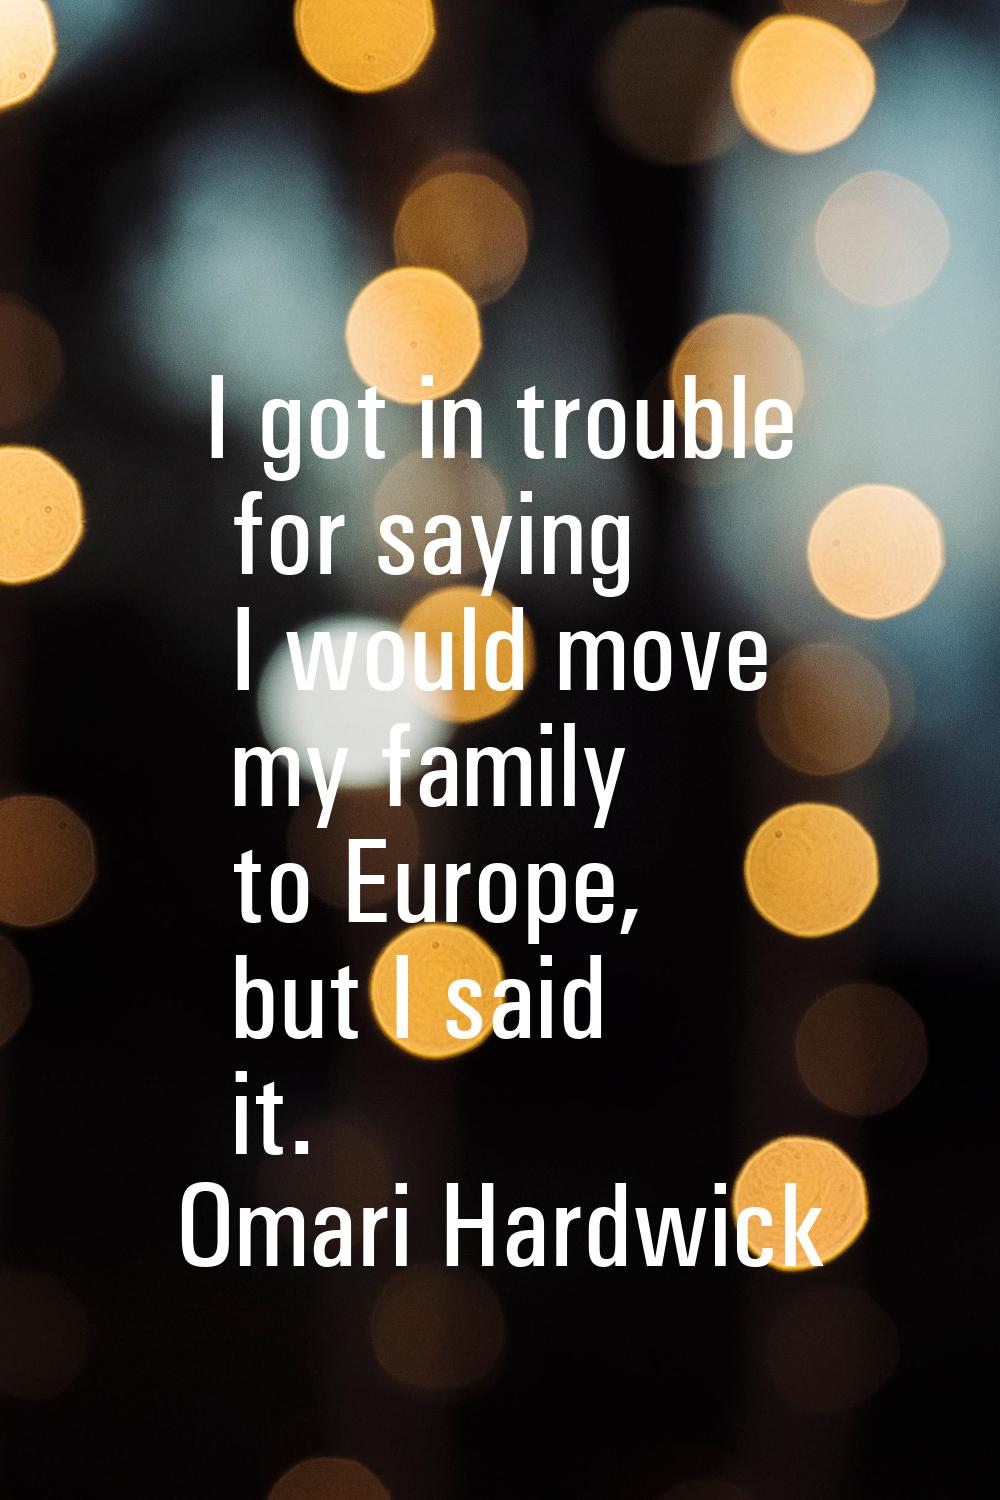 I got in trouble for saying I would move my family to Europe, but I said it.